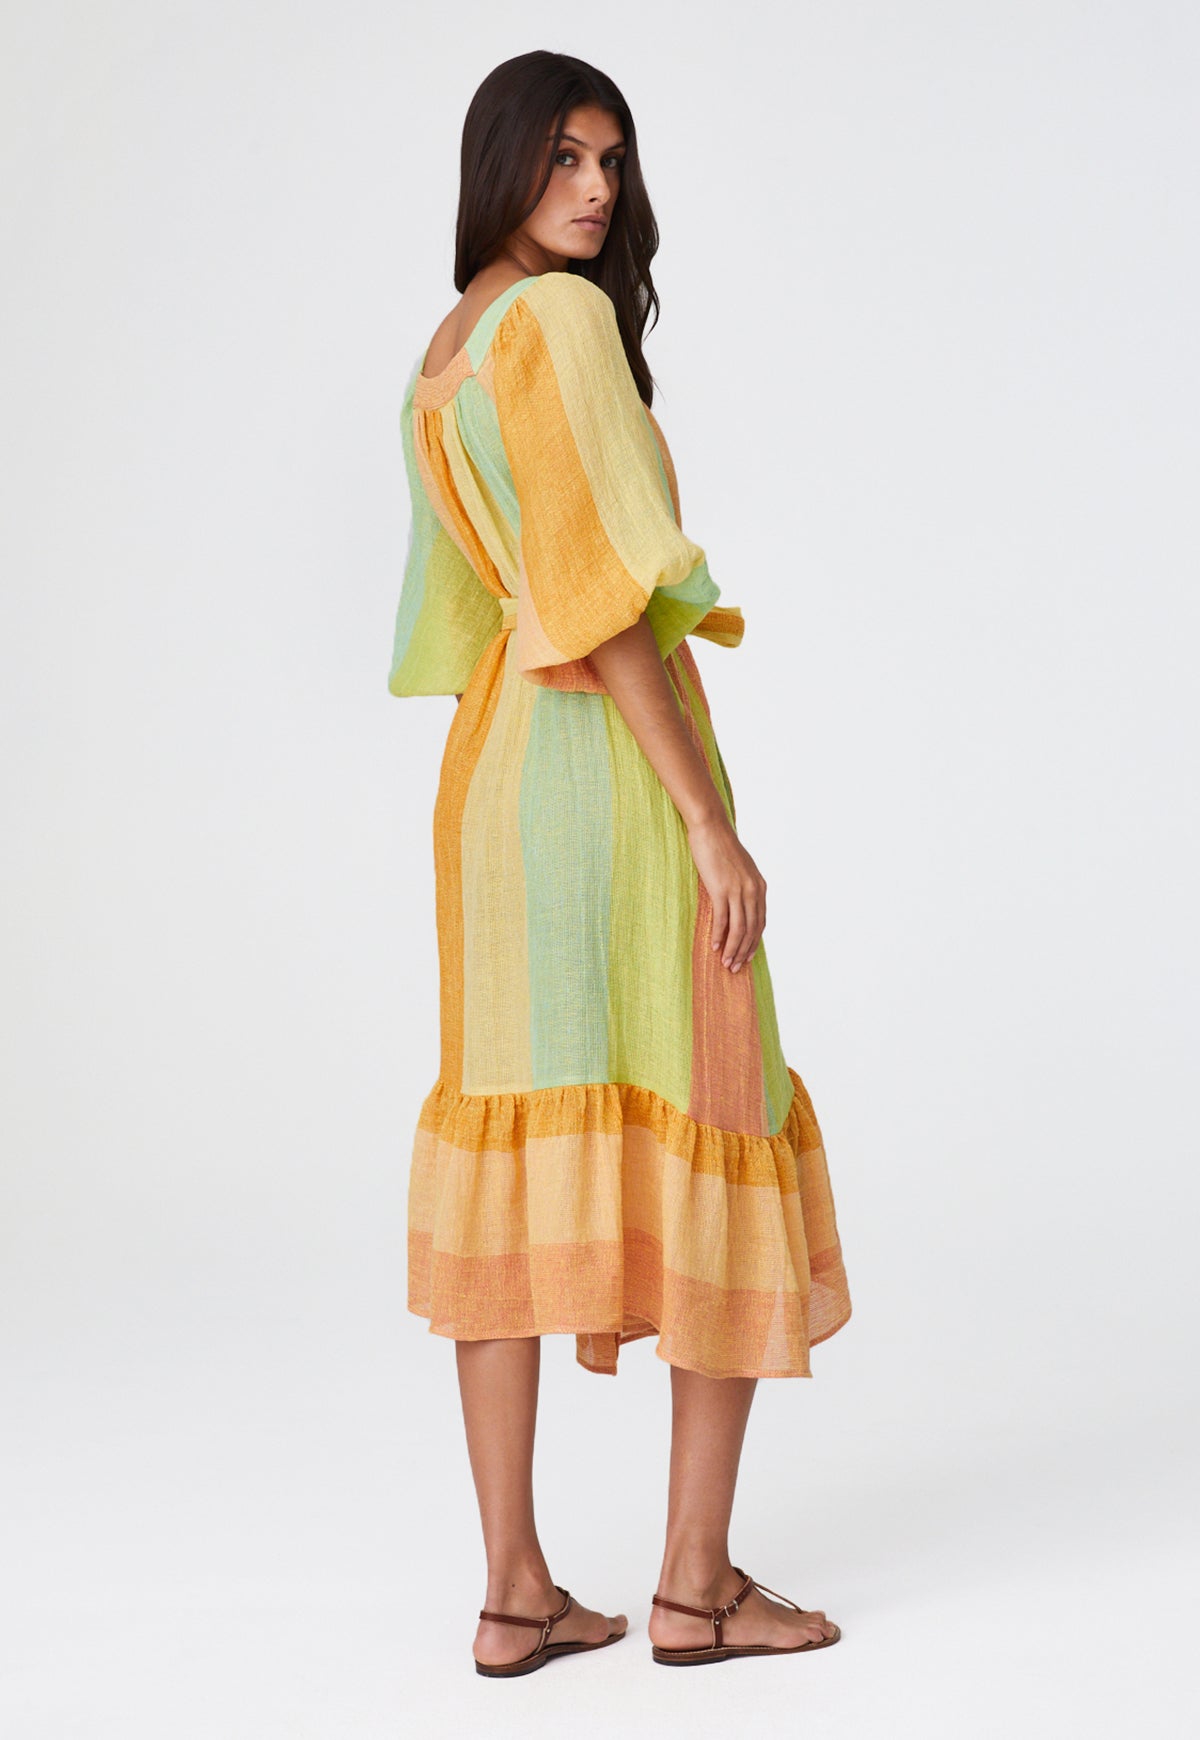 THE LAURE DRESS in CITRUS AWNING STRIPED GAUZE